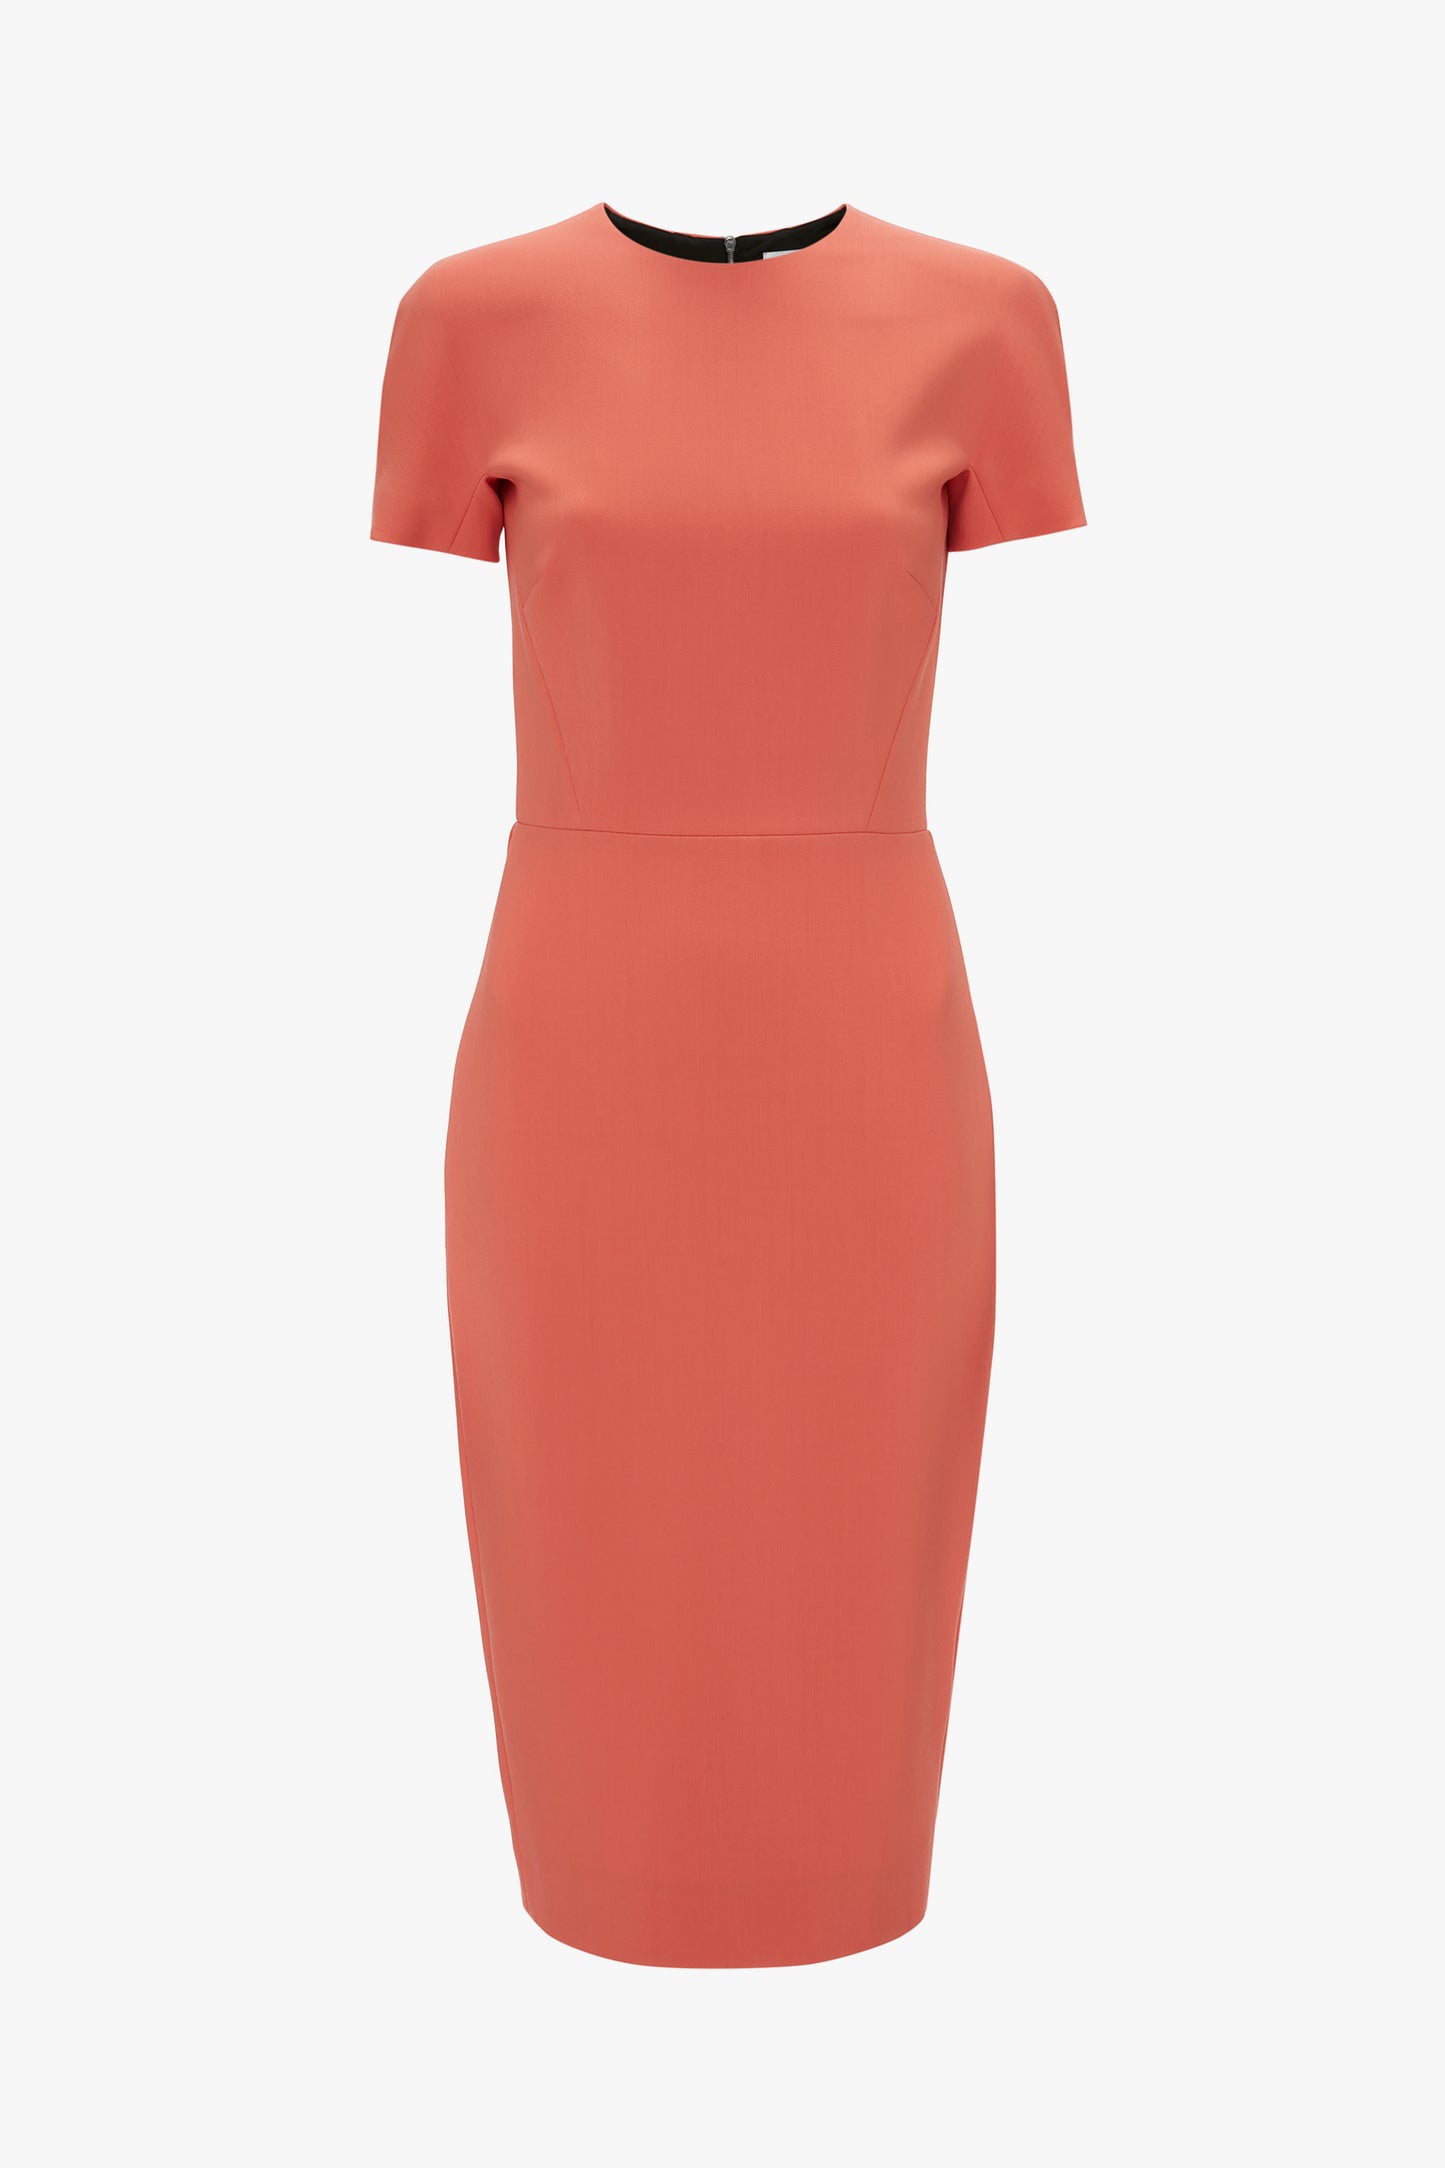 A fitted T-shirt dress in papaya from Victoria Beckham with short sleeves and a boat neckline, isolated on a white background.